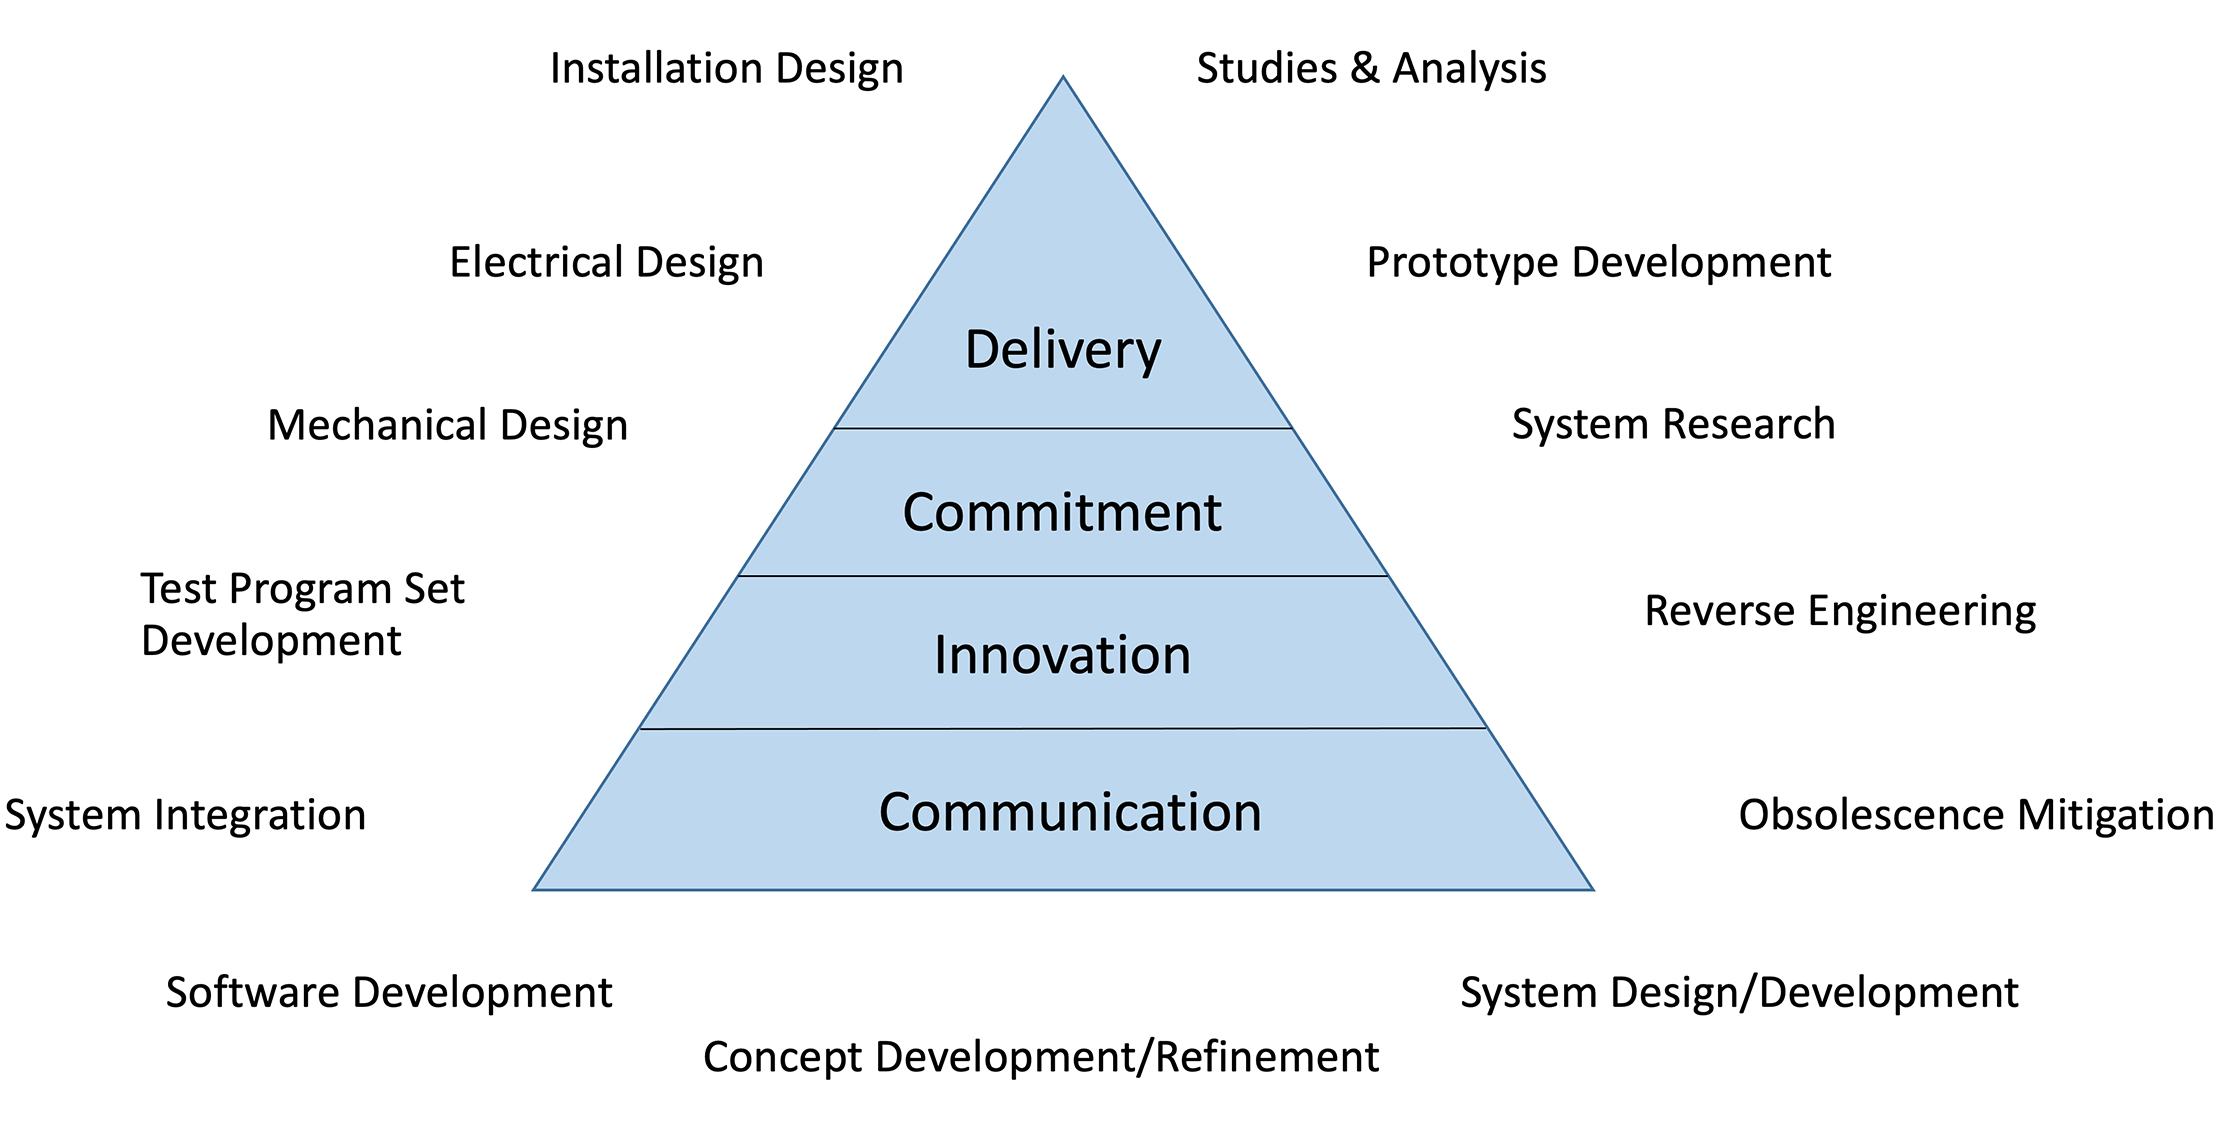 Pyramid graphic with four layers labeled "Communication", "Innovation", "Commitment", and "Delivery" from bottom to top